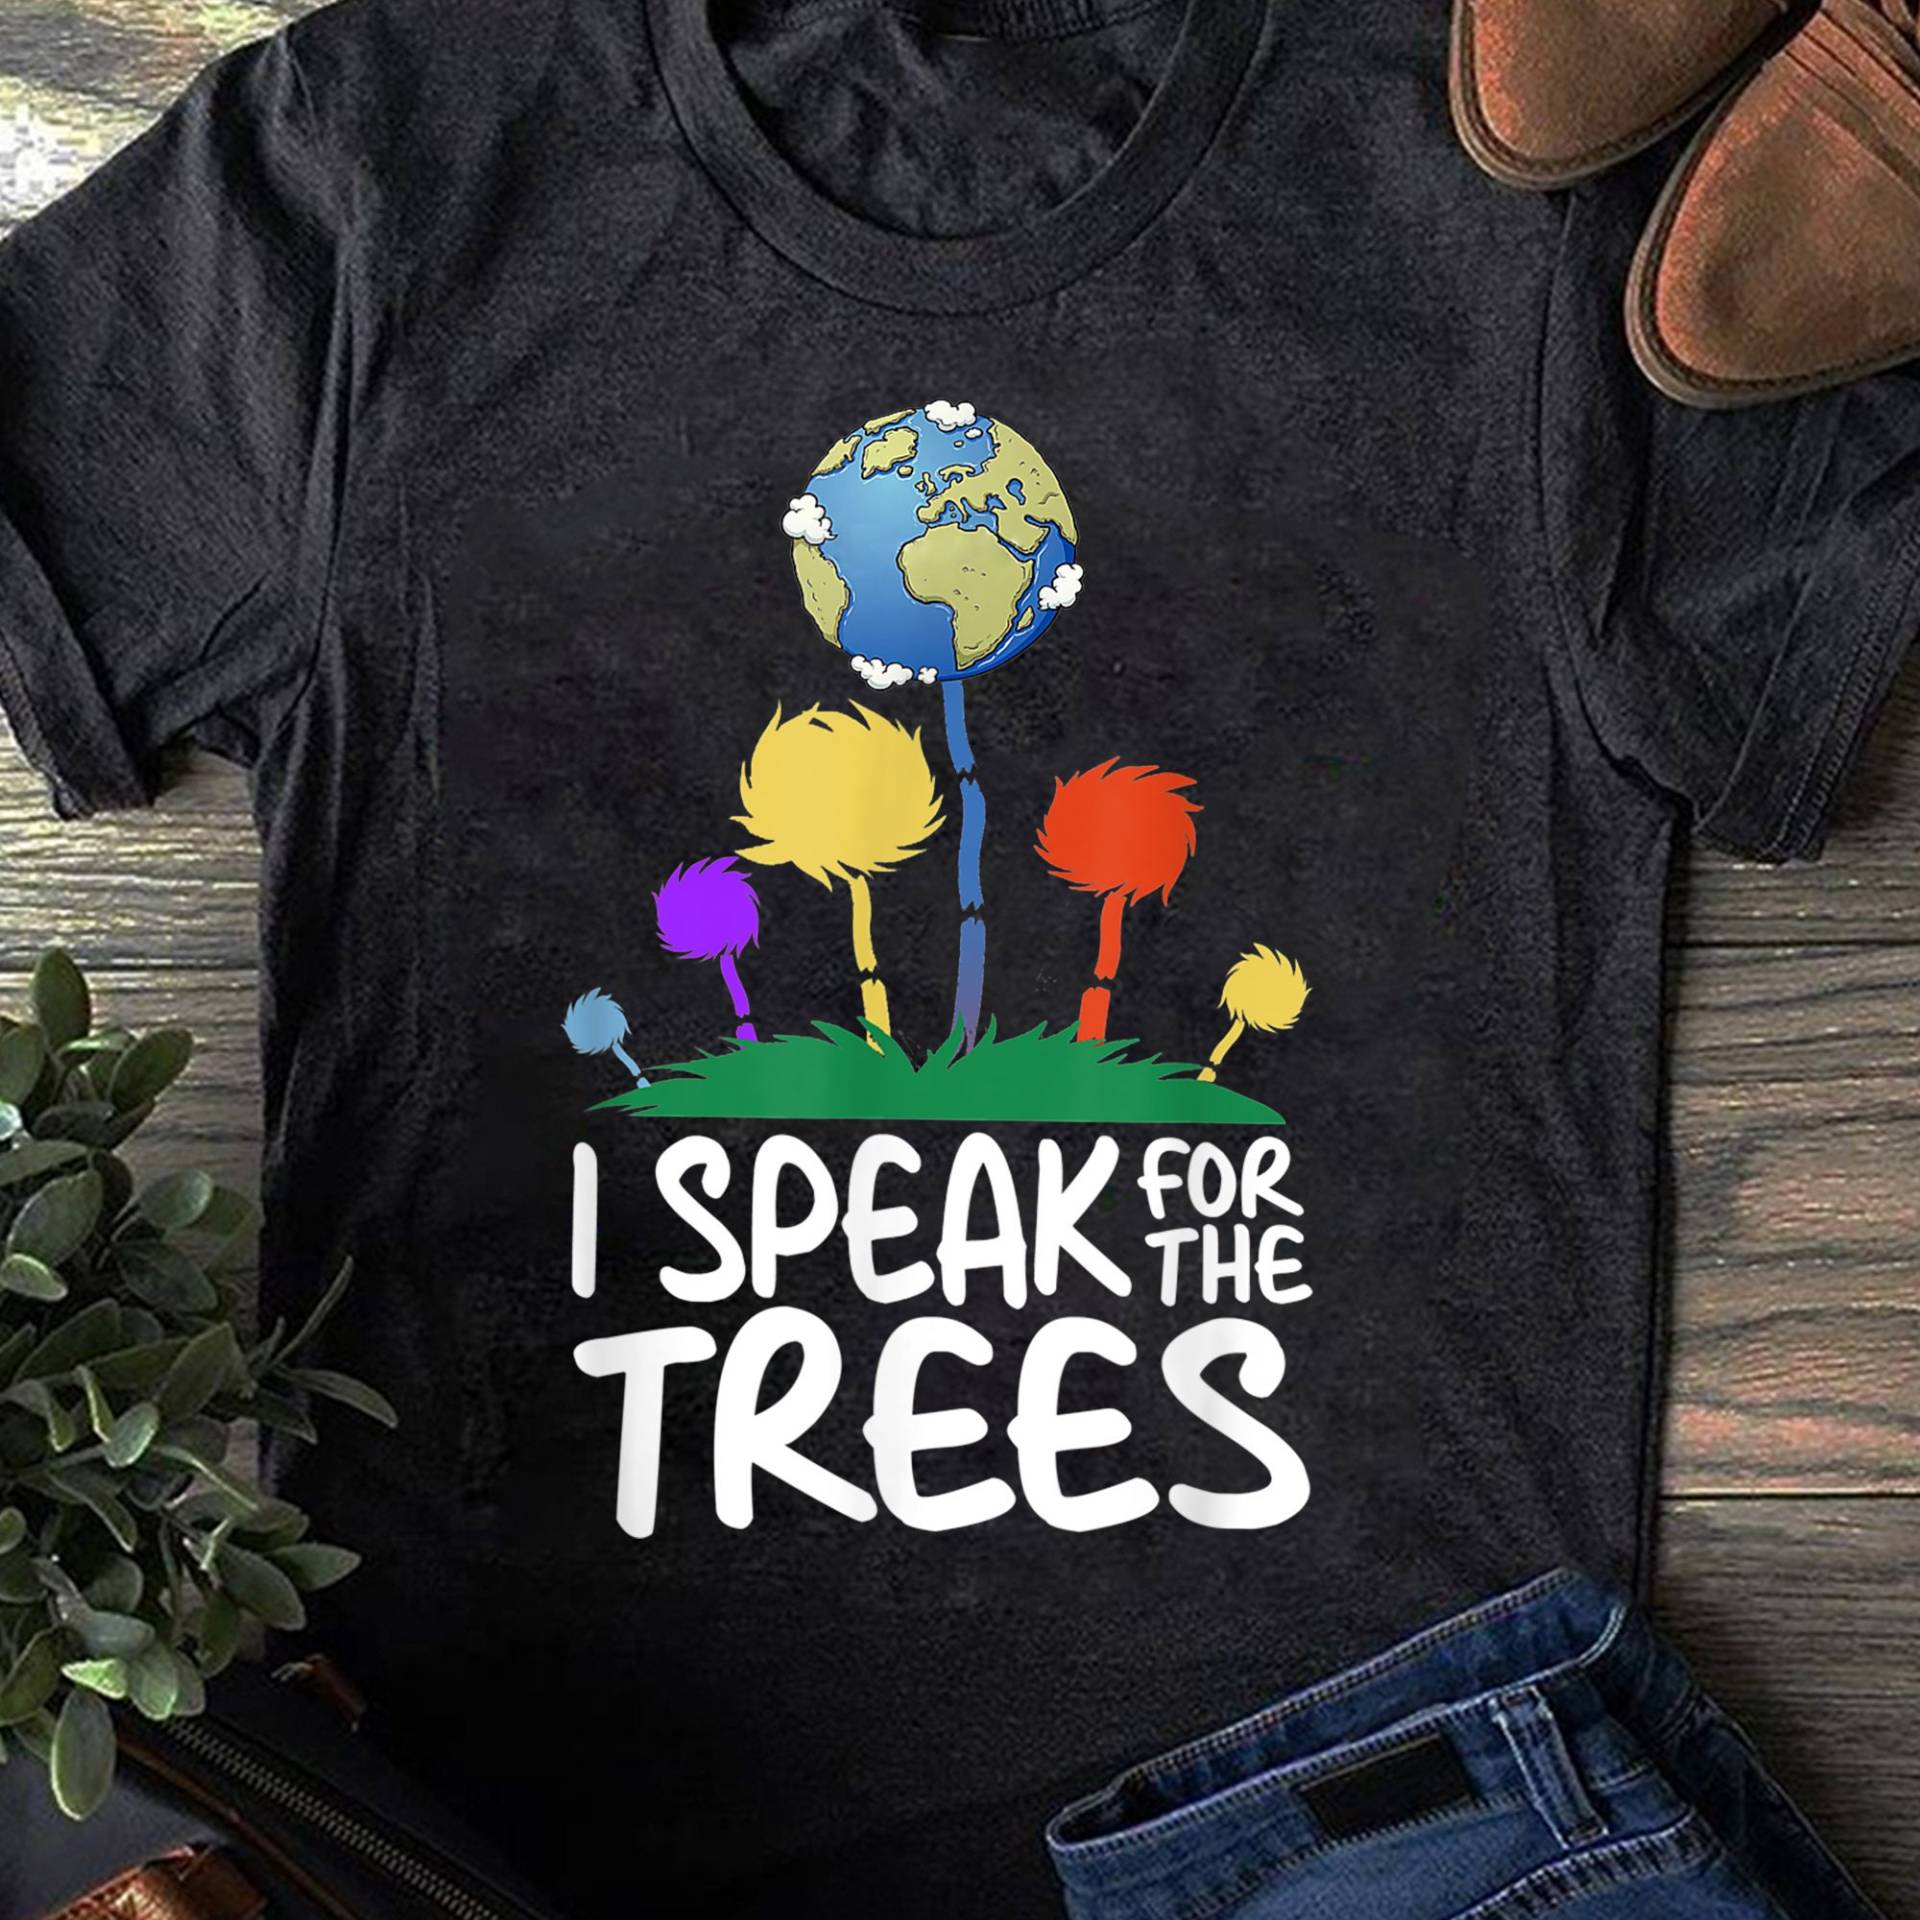 I Speak For Trees Earth Day Save Inspiration Hippie T-Shirt - Shirt, Soul Peace T-Shirt von LeonaTee